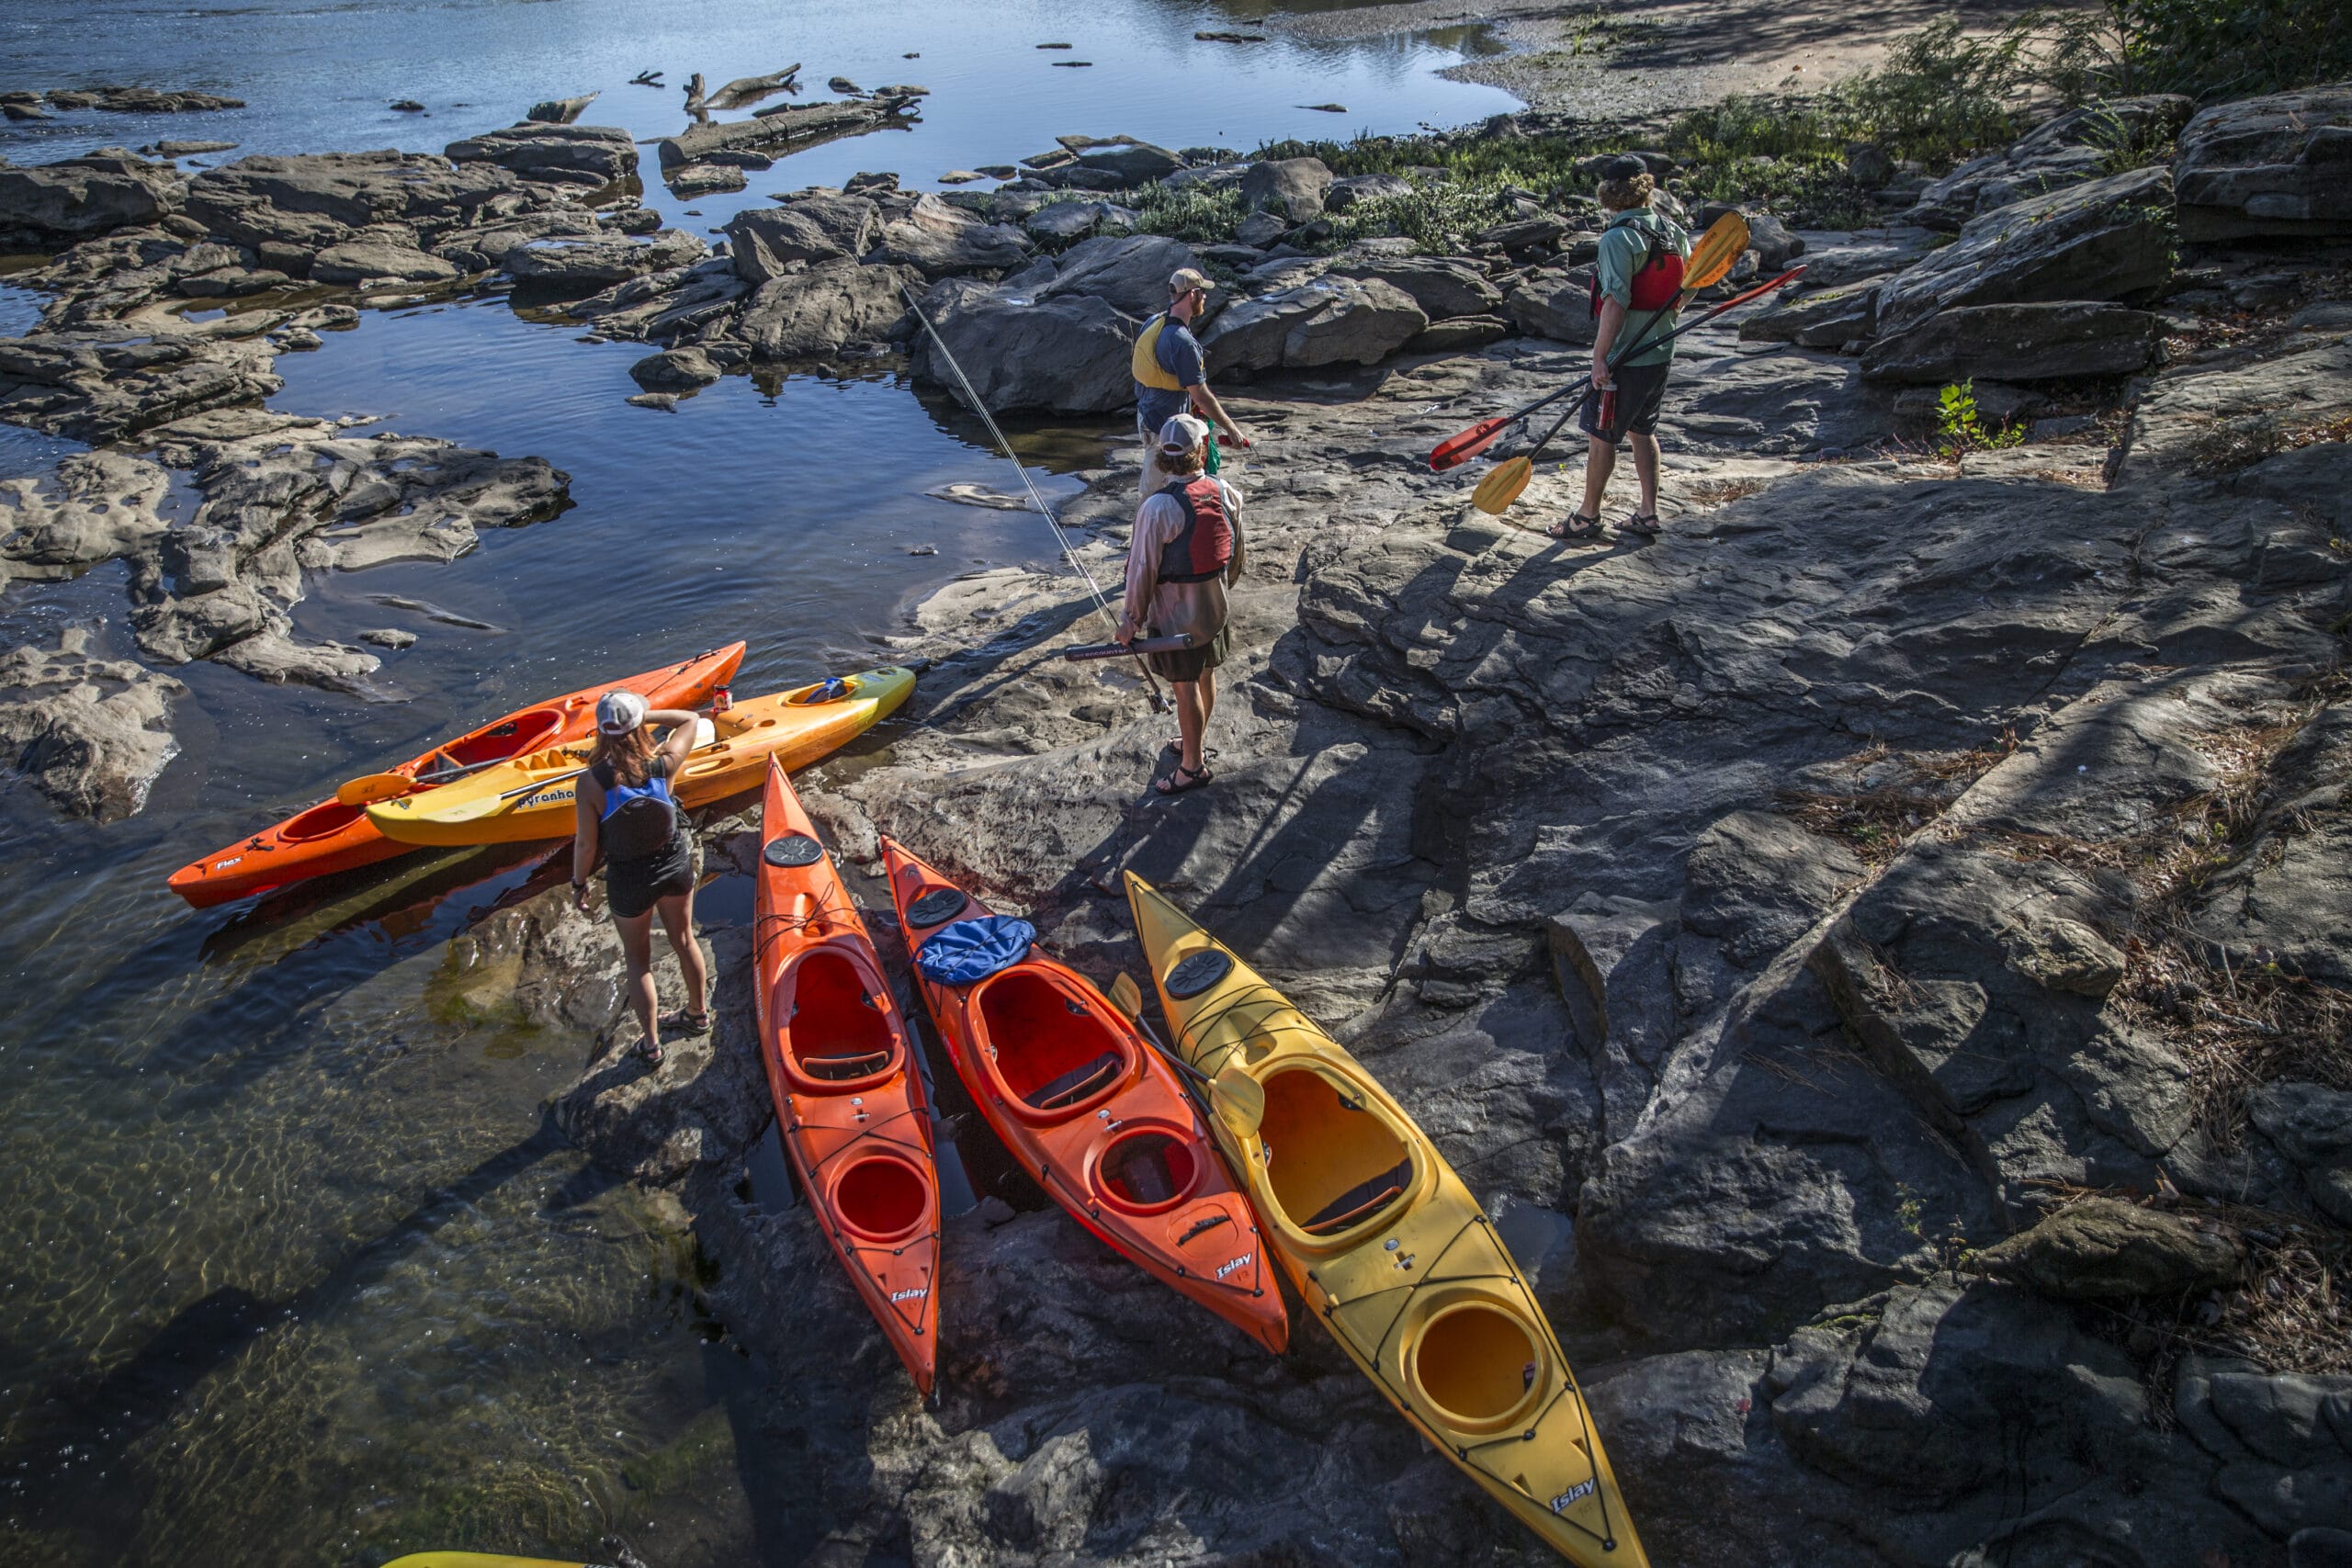 A group of people standing next to a group of kayaks.